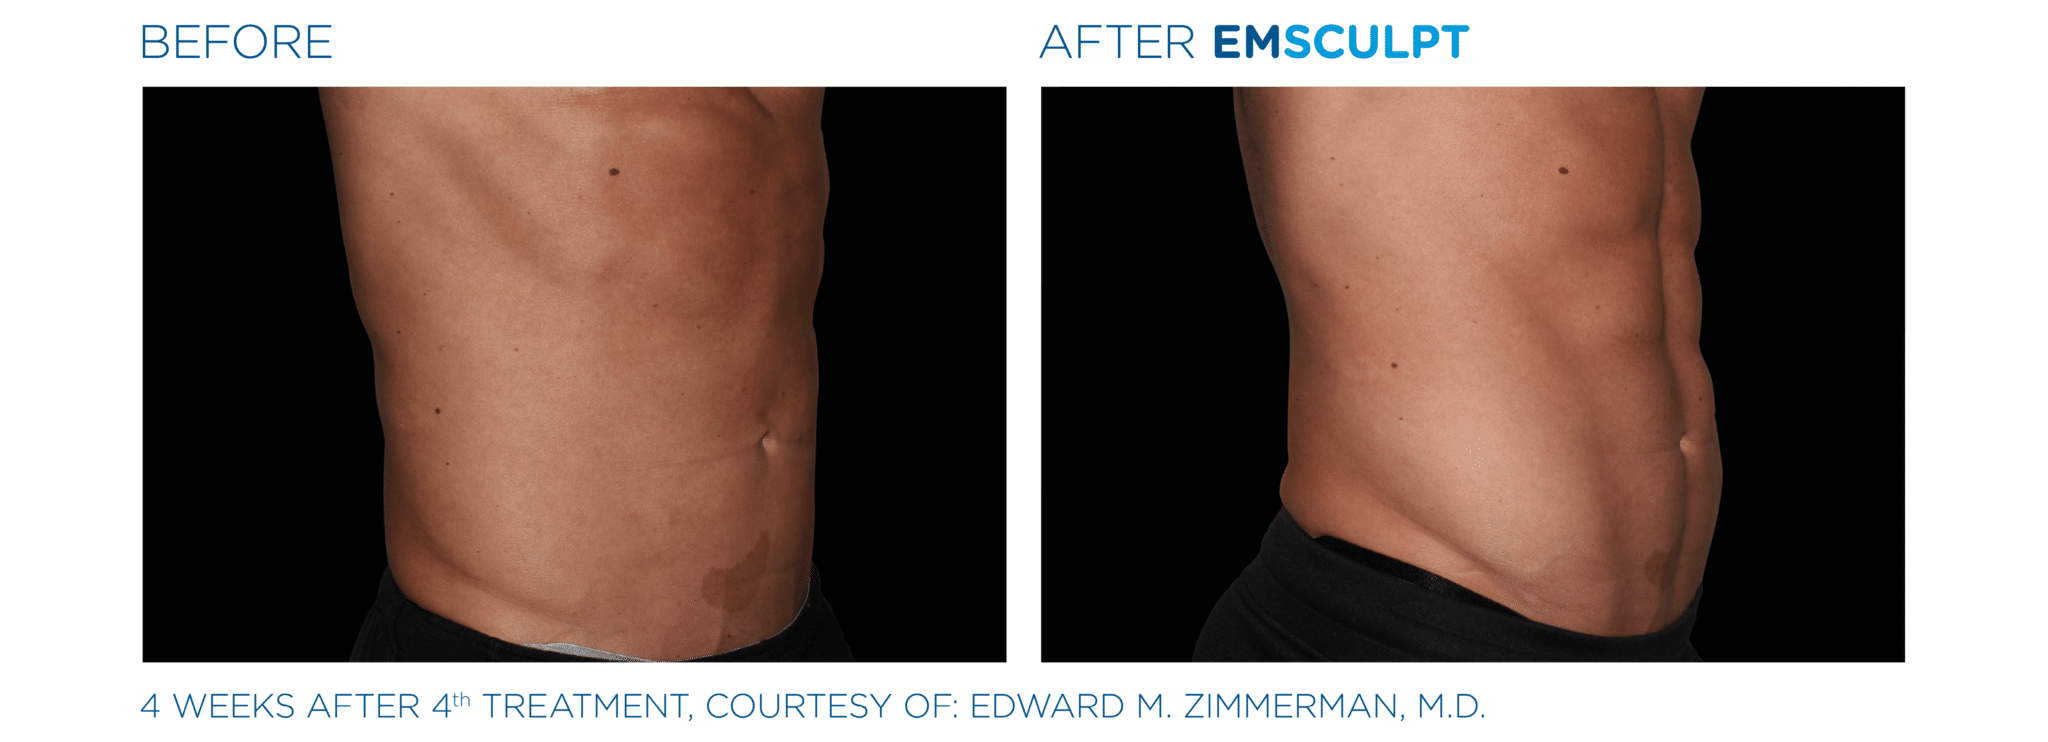 Emsculpt Before and After